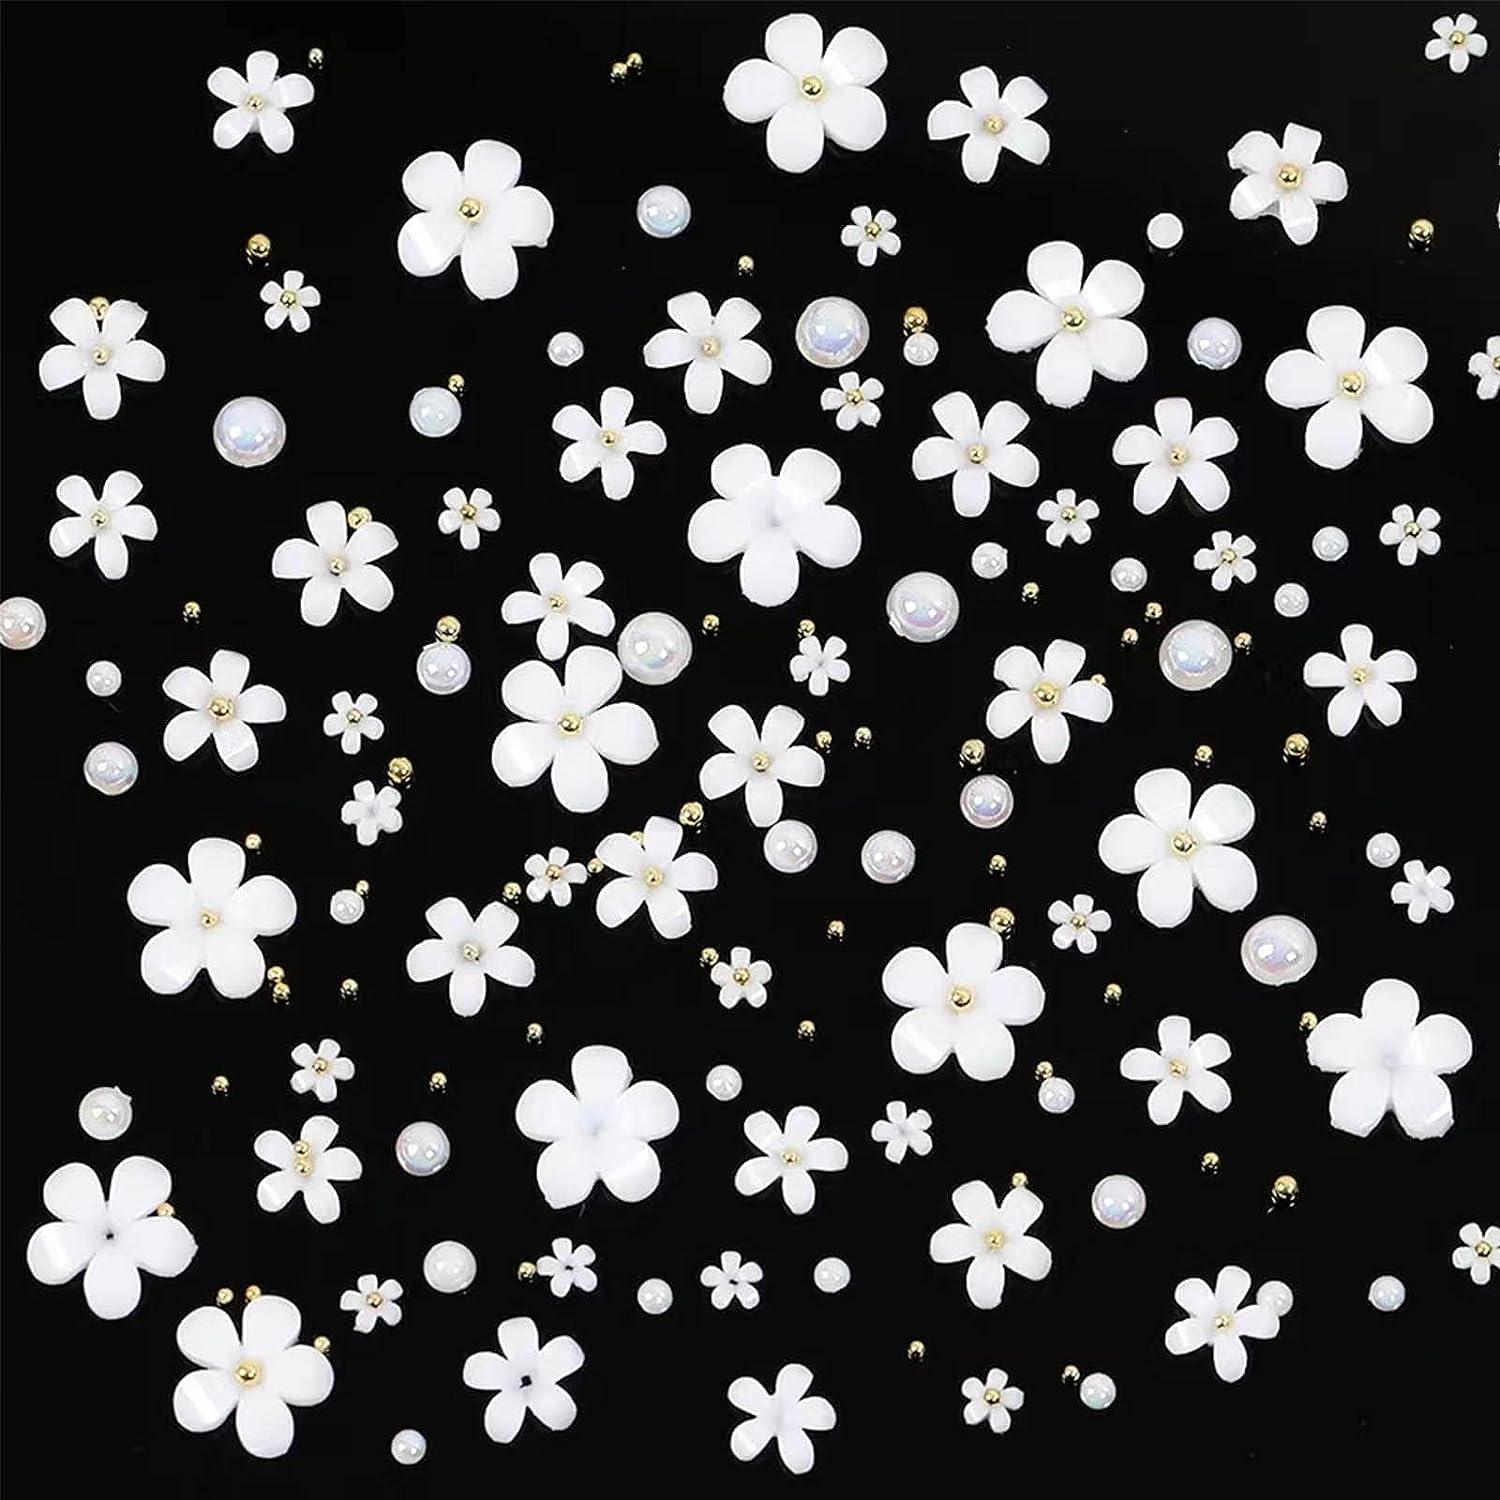 YOSOMK 3D Flower Nail Art Charms White Flowers Nail Charms with Gold White  Nail Pearls Cherry Blossom Nail Decorations Acrylic Nail Supplies  Accessories for Women Nail DIY Design